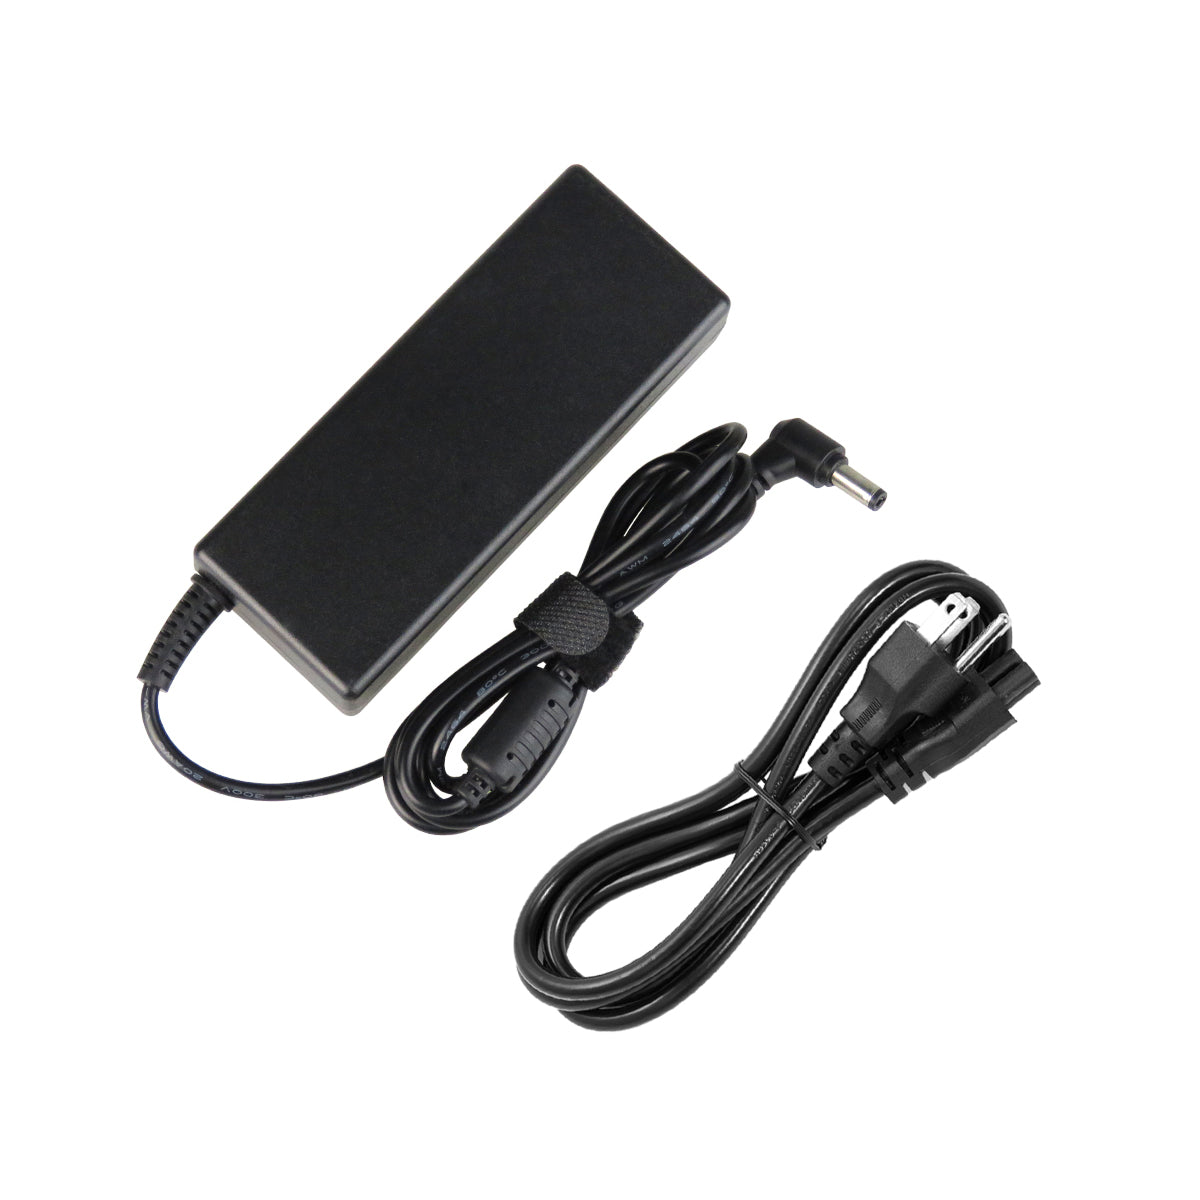 AC Adapter Charger for ASUS K43BY Notebook.